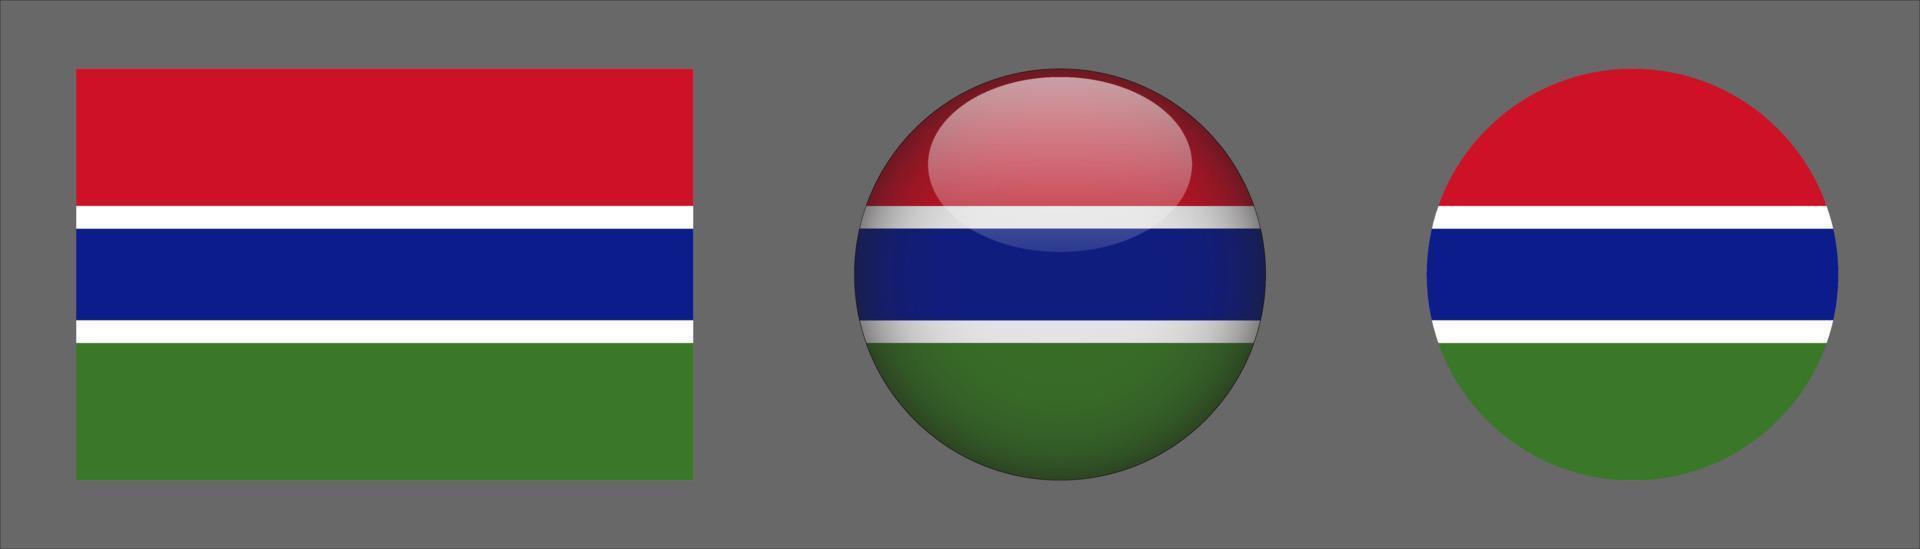 Gambia Flag Set Collection, Original Size Ratio, 3d Rounded and Flat Rounded vector